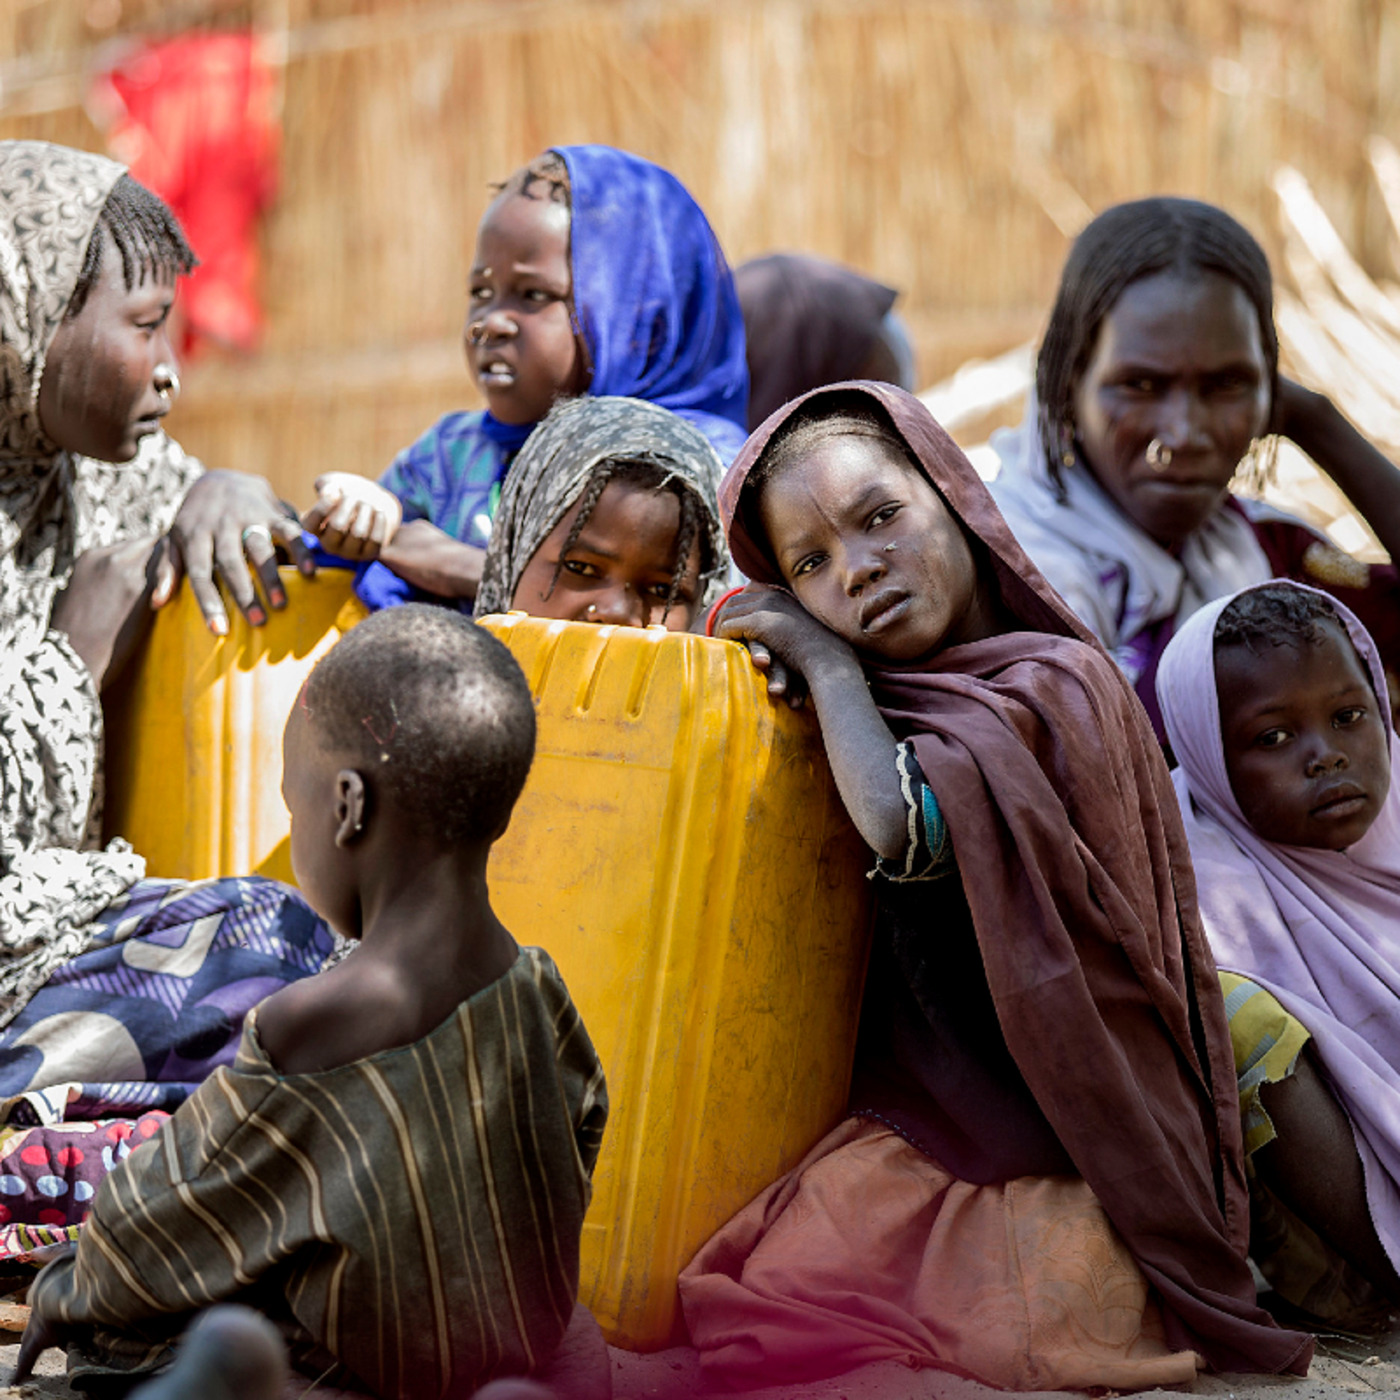 Chitra Nagarajan on What’s Changed for Women in Lake Chad Region